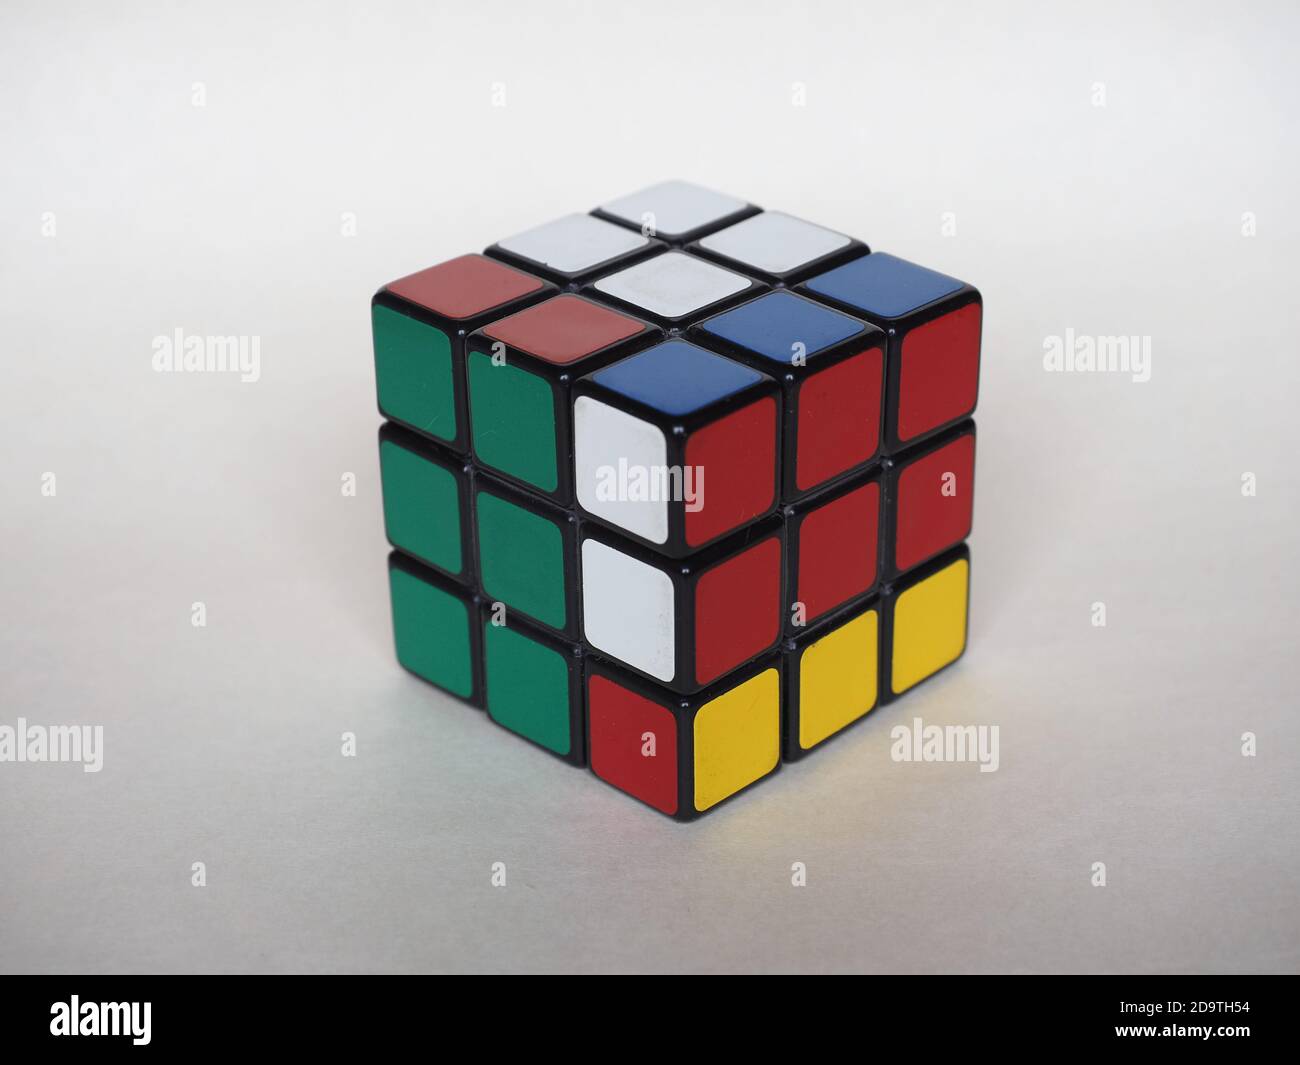 Rubiks Magic Cube High Resolution Stock Photography and Images - Alamy